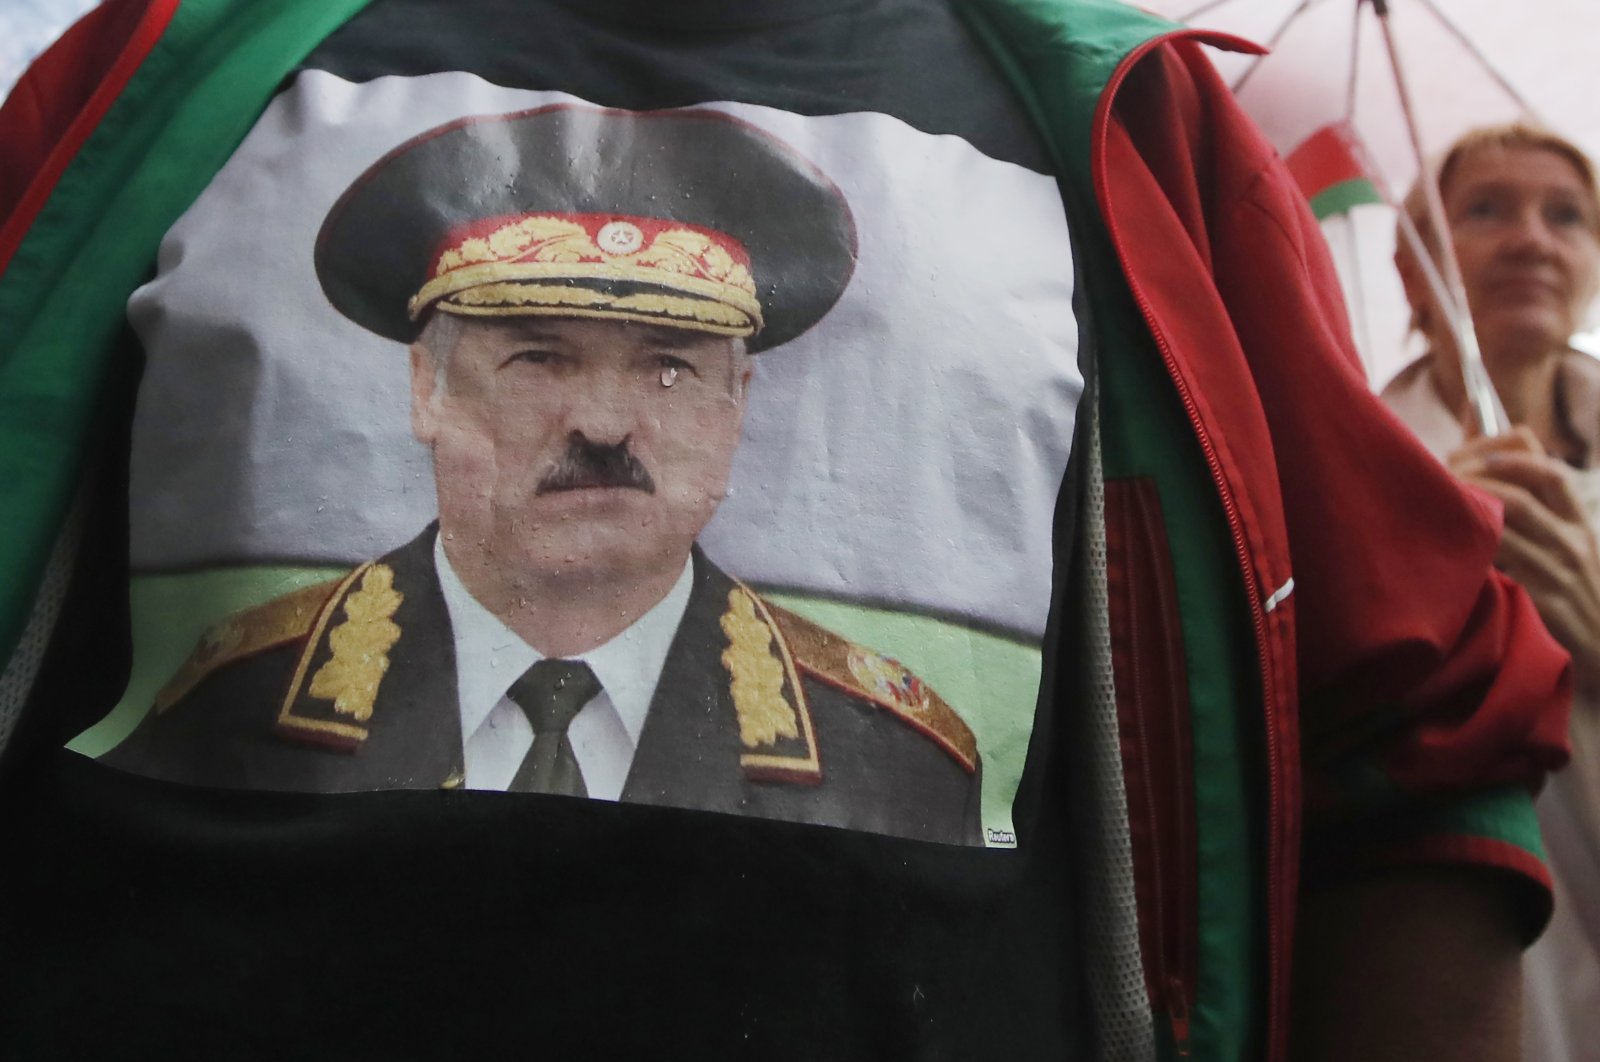 A man wearing a sweatshirt with a portrait of Belarus President Alexander Lukashenko attends a pro-government rally in Minsk, Belarus, Tuesday, Aug. 25, 2020. (AP Photo)